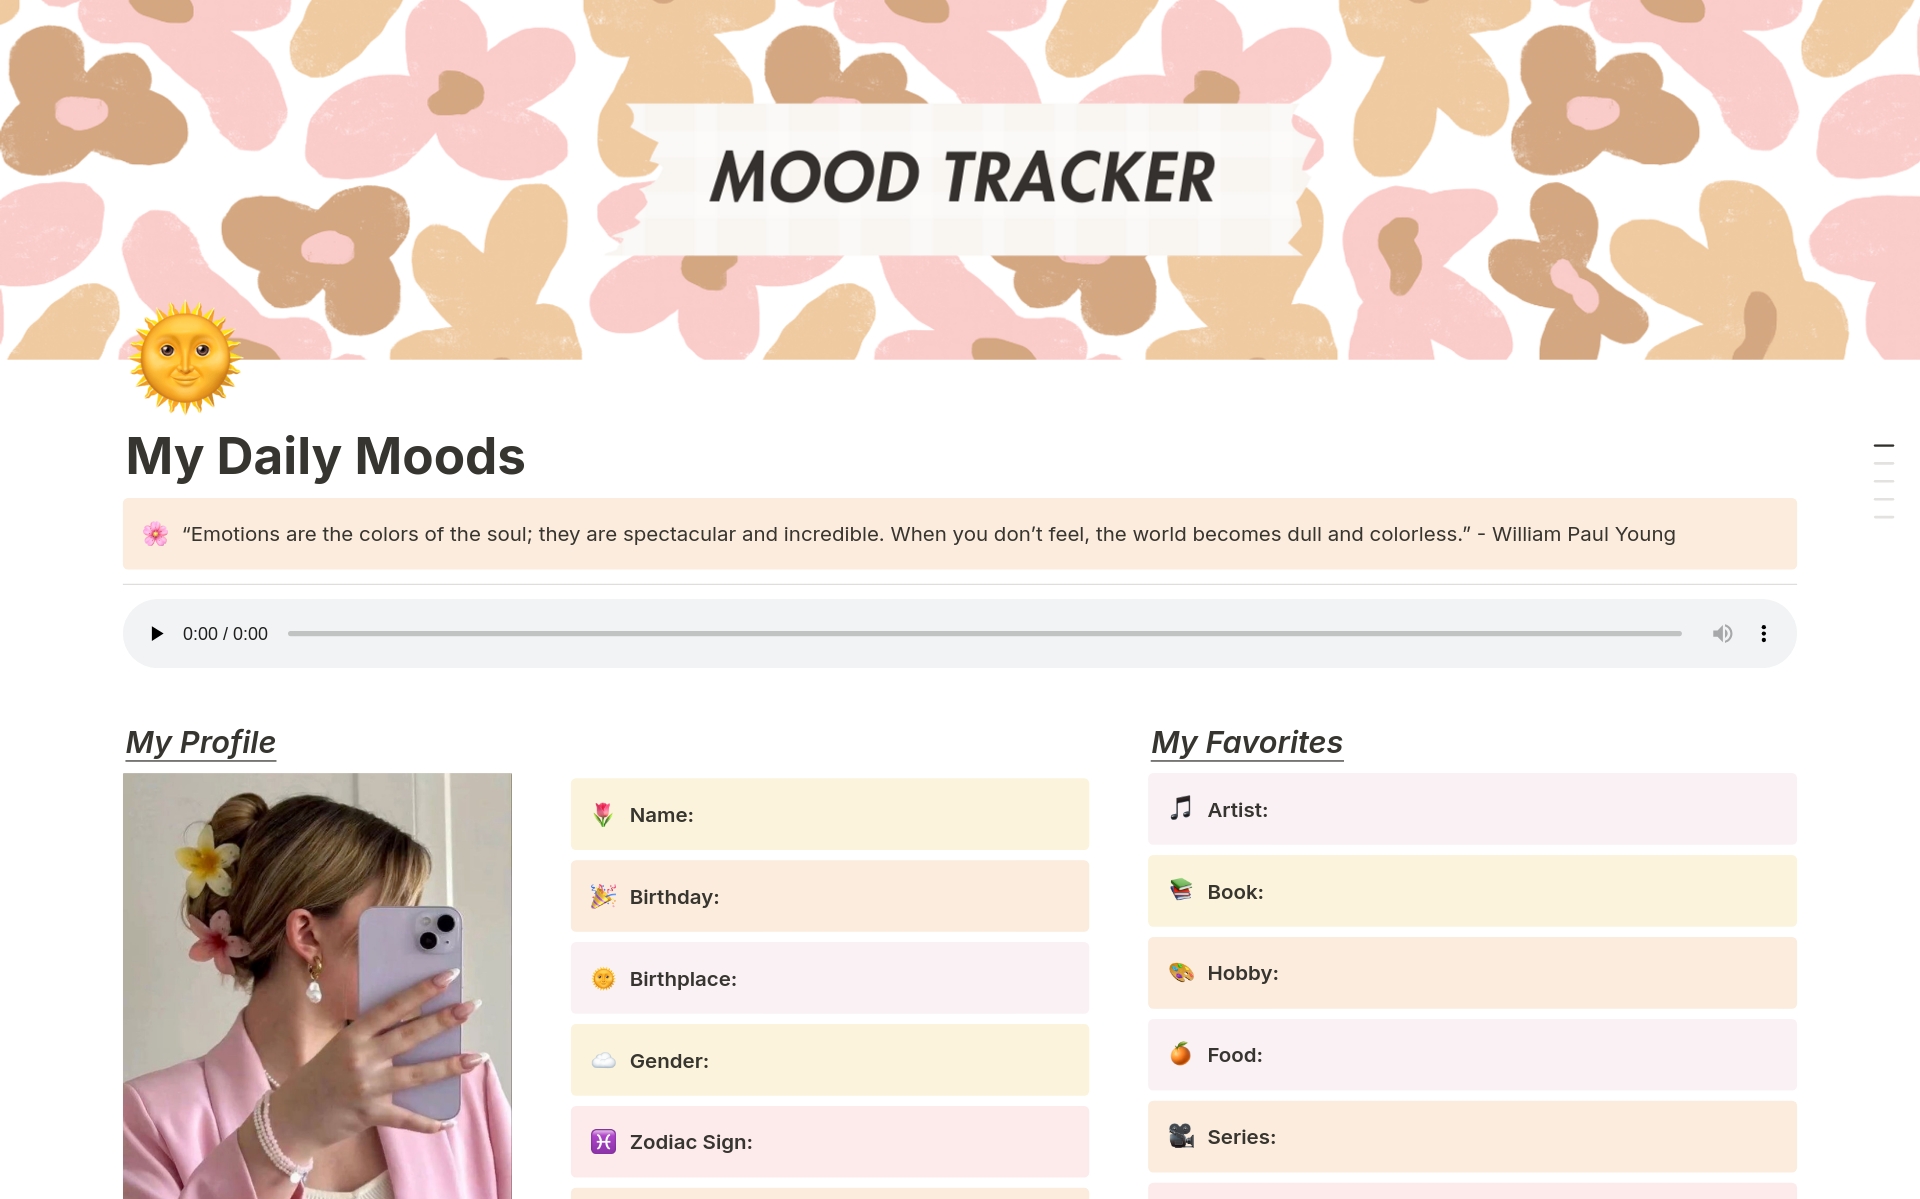 Track your daily moods using the color indicators!